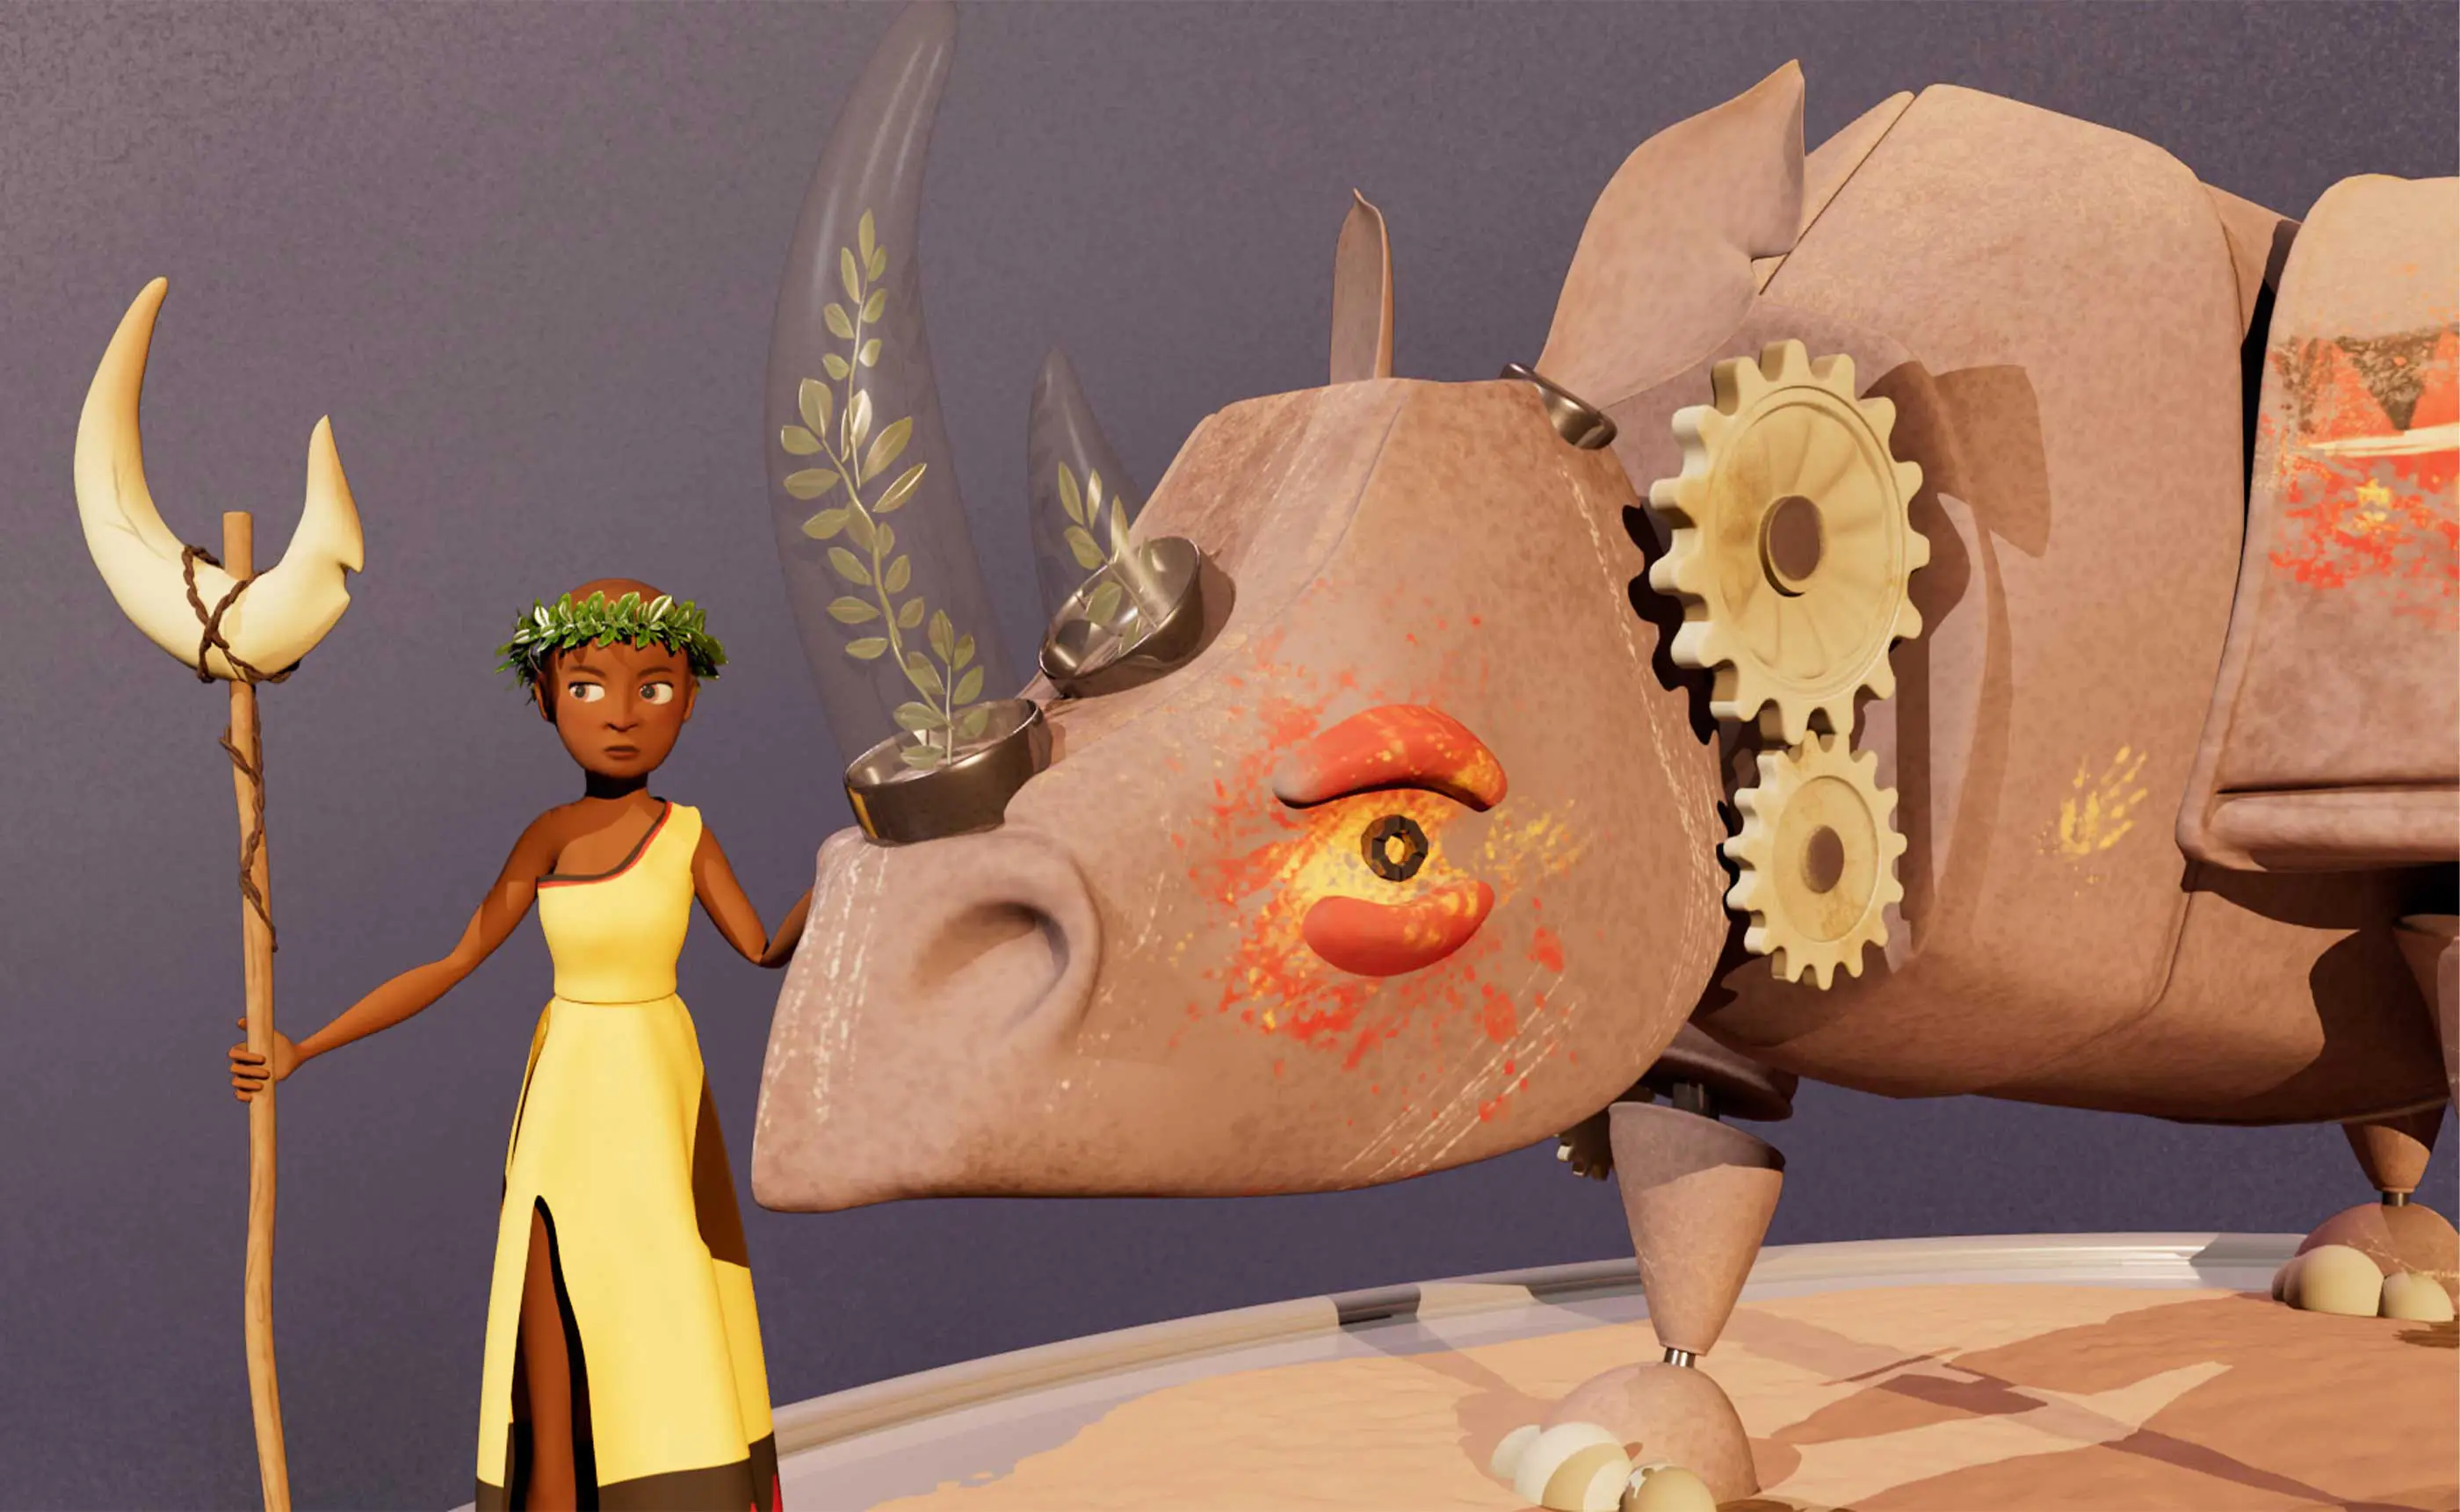 A 3D render of a woman and toy rhinoceros